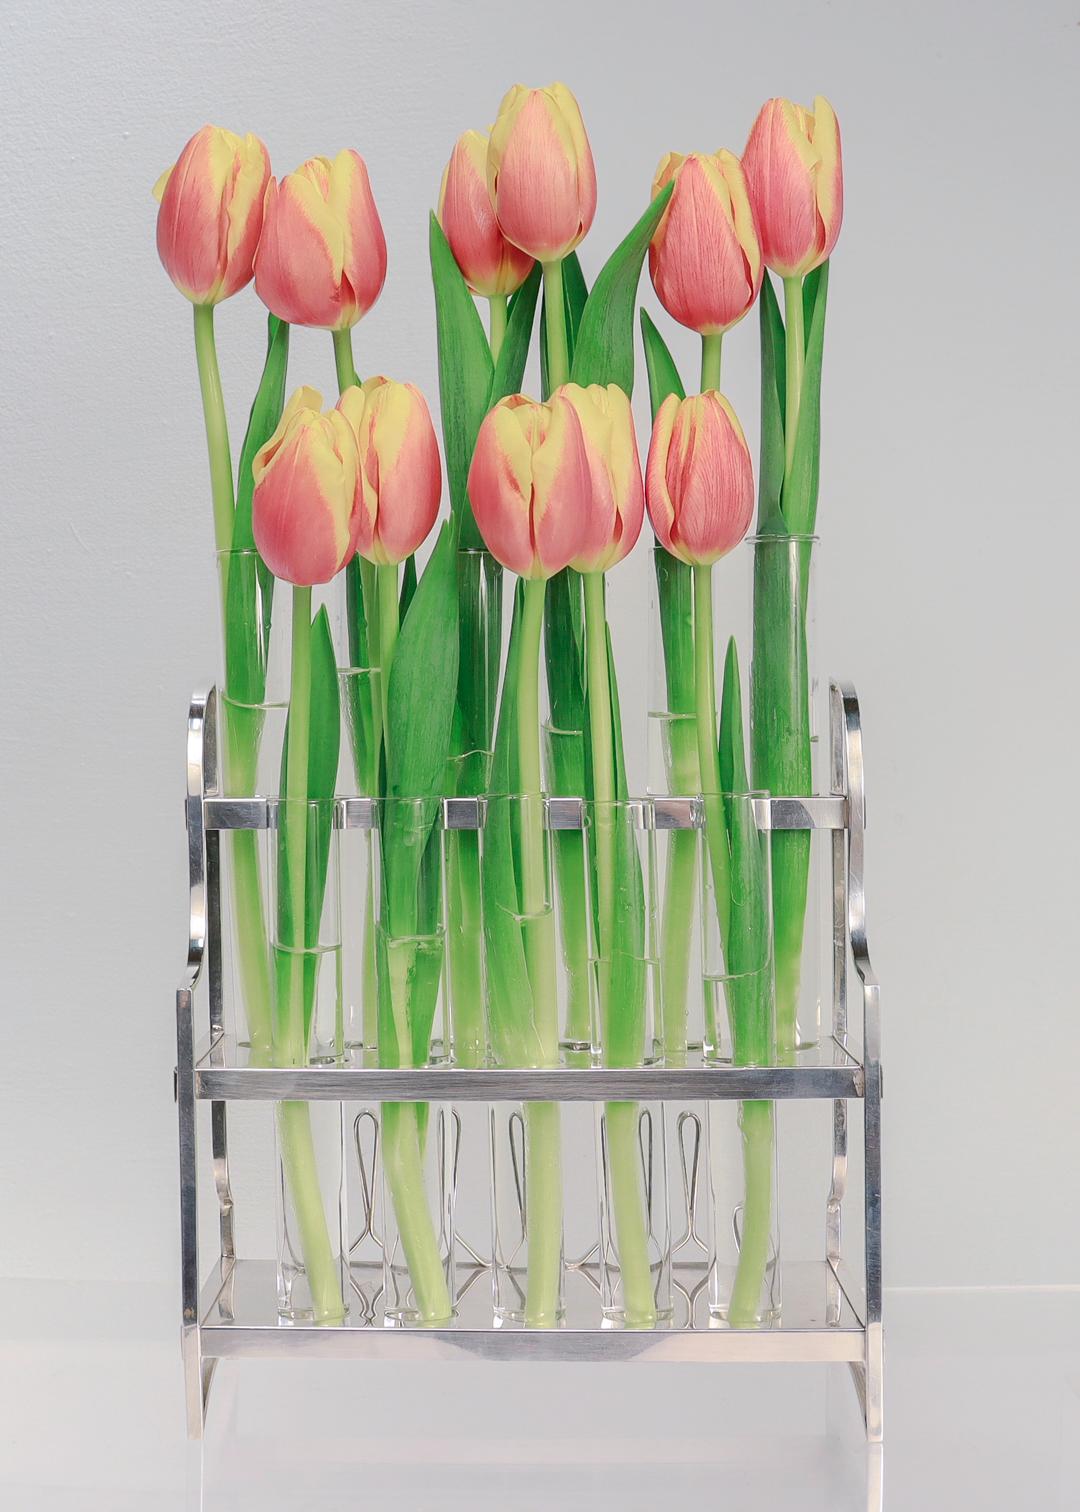 A fine signed, antique test tube or vase stand.

By Cartier.

In sterling silver.

With 11 'test tube' shaped glass inserts.

Perfect suited as a propagation stand or as a Tulipiere / bud vase.

Signed to the reverse.

Simply an incredible piece